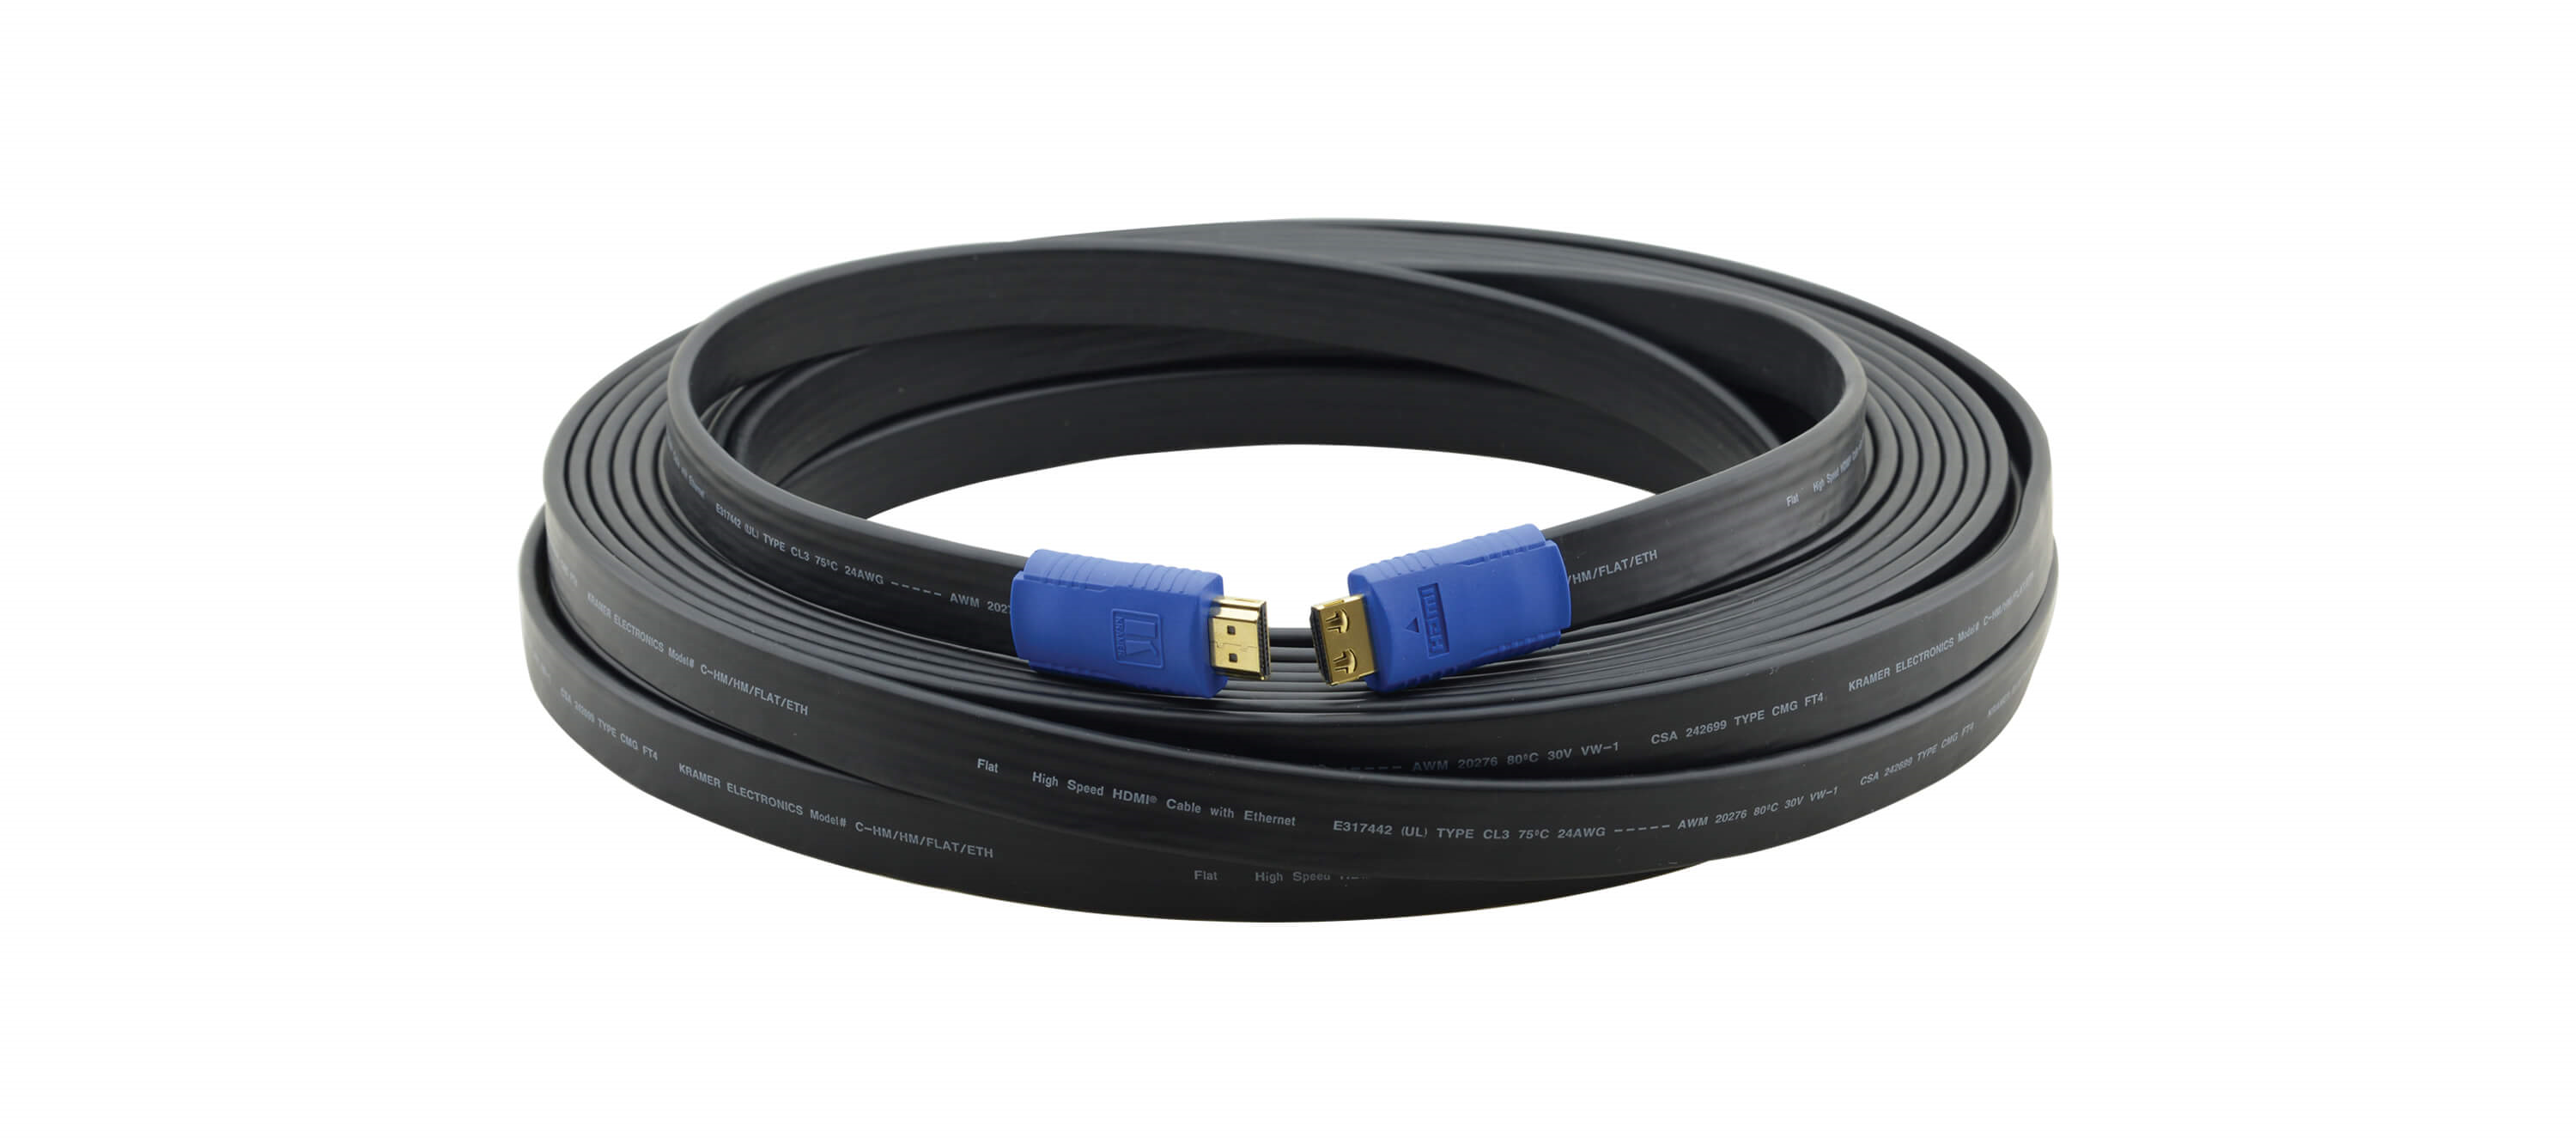 C-HM/HM/FLAT/ETH-10 Flat High–Speed HDMI Cable with Ethernet - 10'